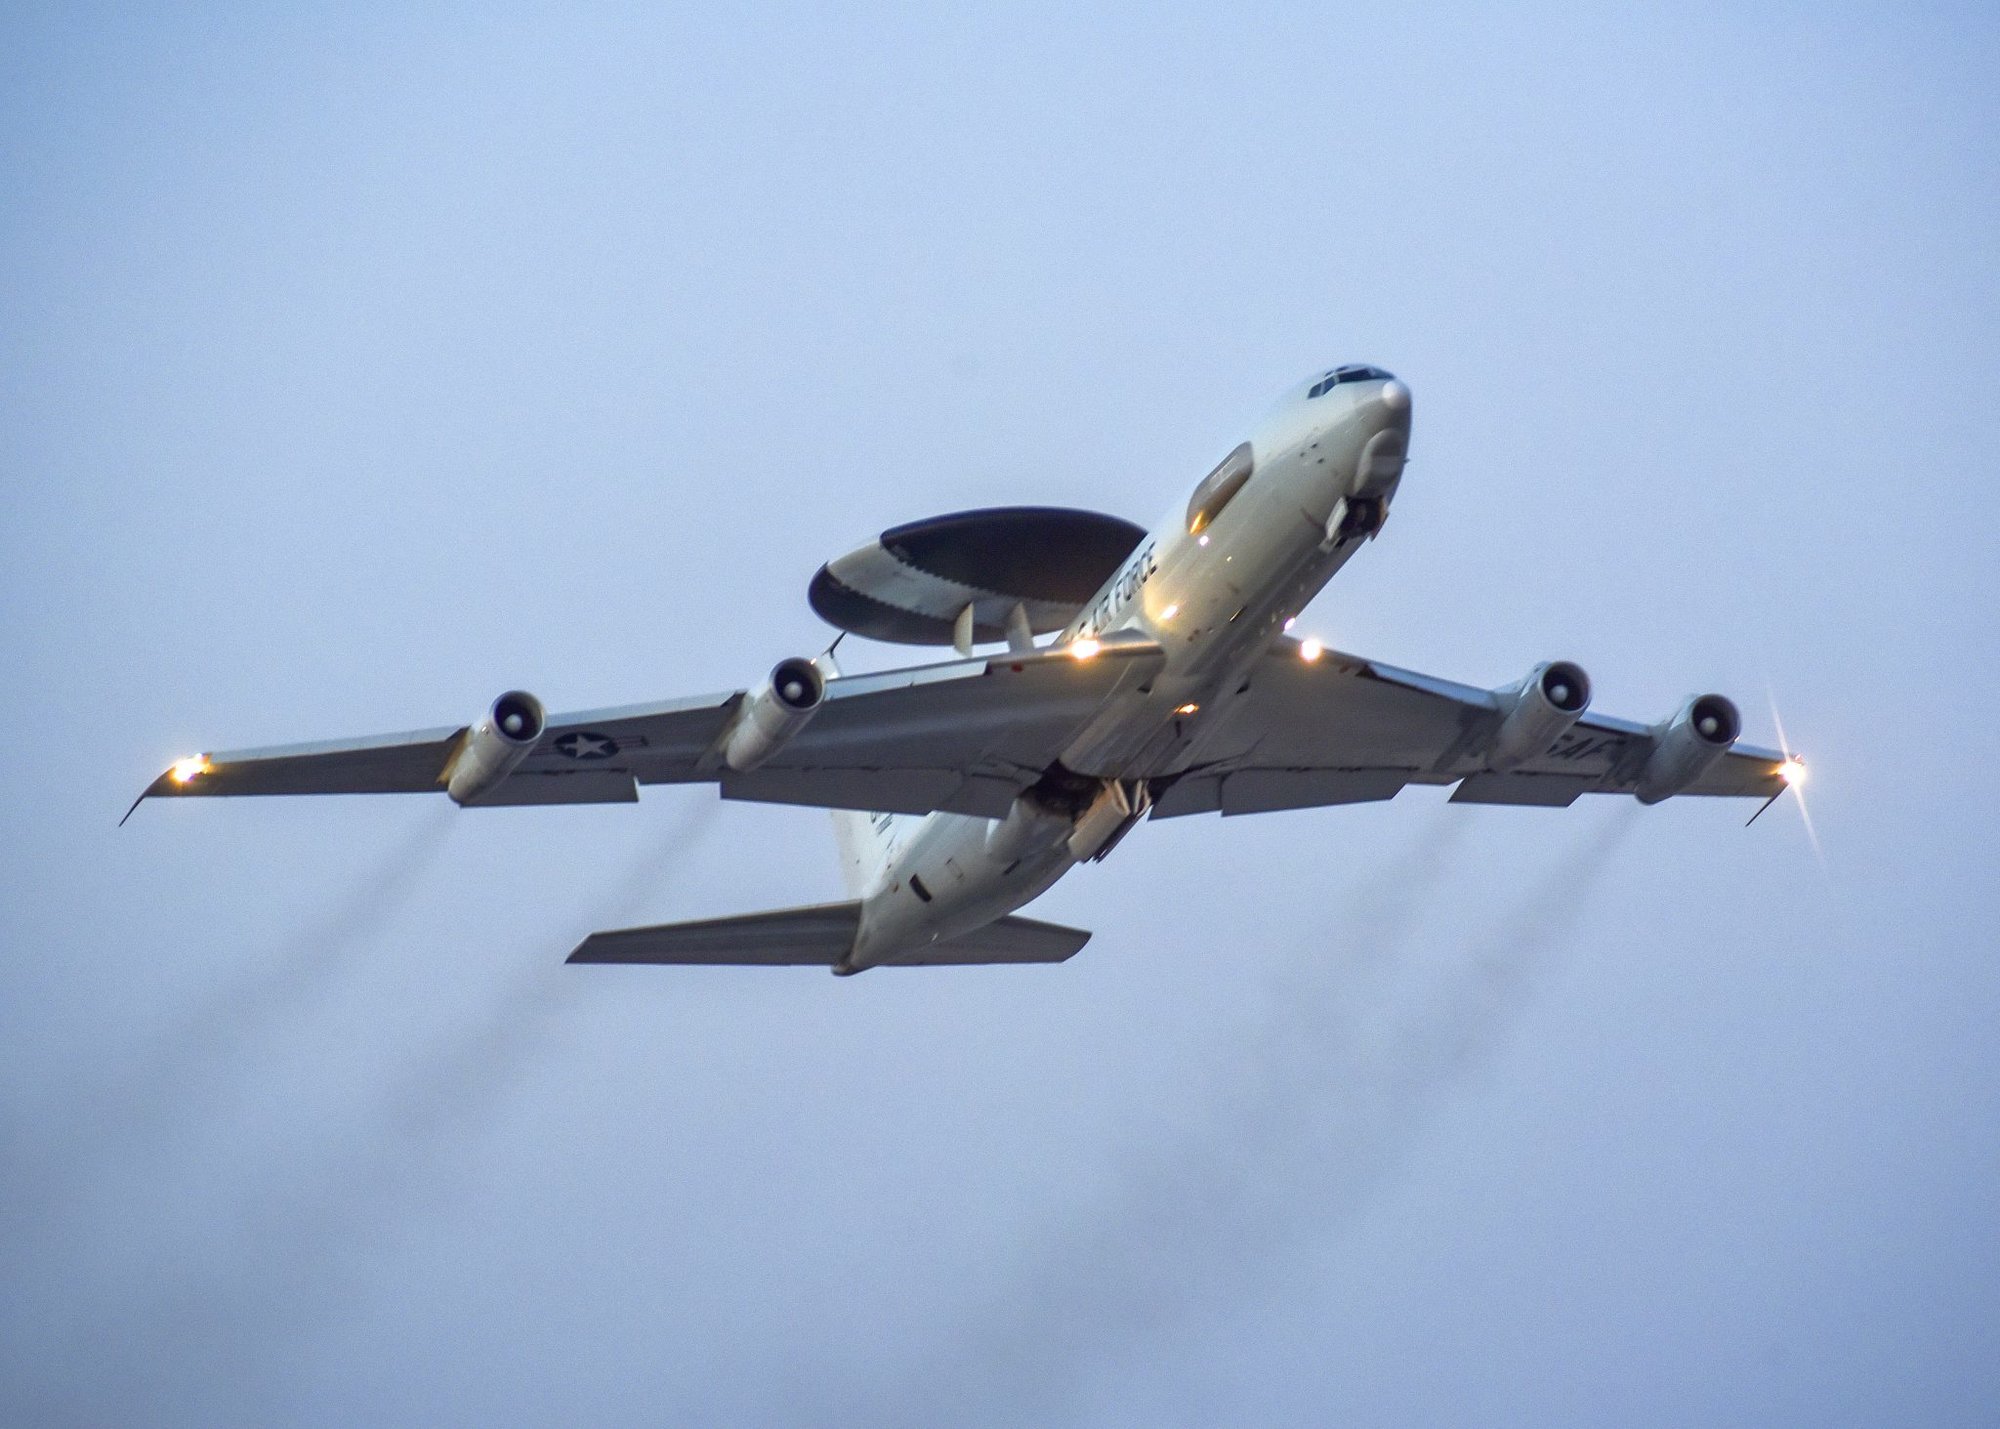 A U.S. Air Force E-3 Sentry Airborne Warning and Control System assigned to the 965th Airborne Air Control Squadron, Tinker Air Force Base, Okla., takes off from Nellis Air Force Base, Nevada, during Red Flag 17-3 June 13, 2017. The E-3 is a mobile command and control platform that provides control anywhere in the world at a moment’s notice. (U.S. Air Force photo by Senior Airman Dustin Mullen)